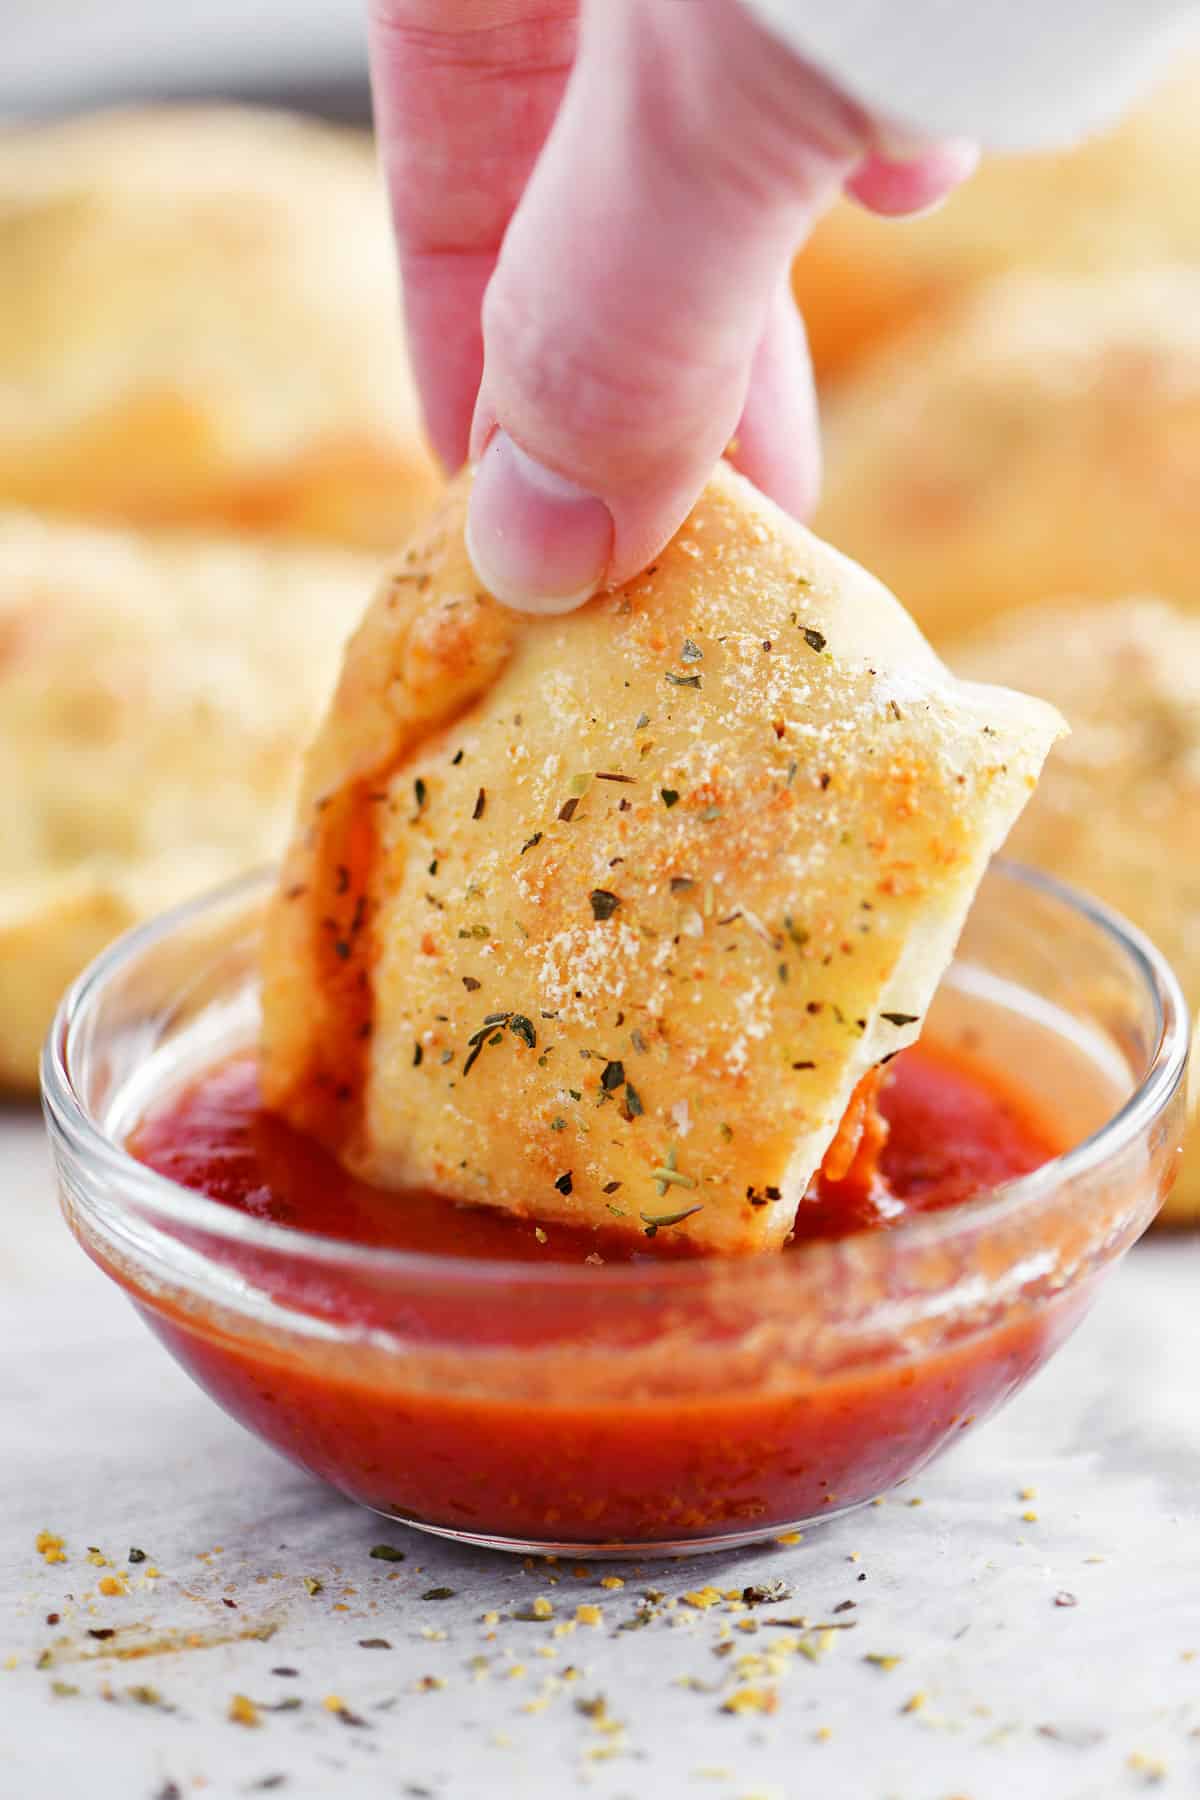 dipping calzone in pizza sauce